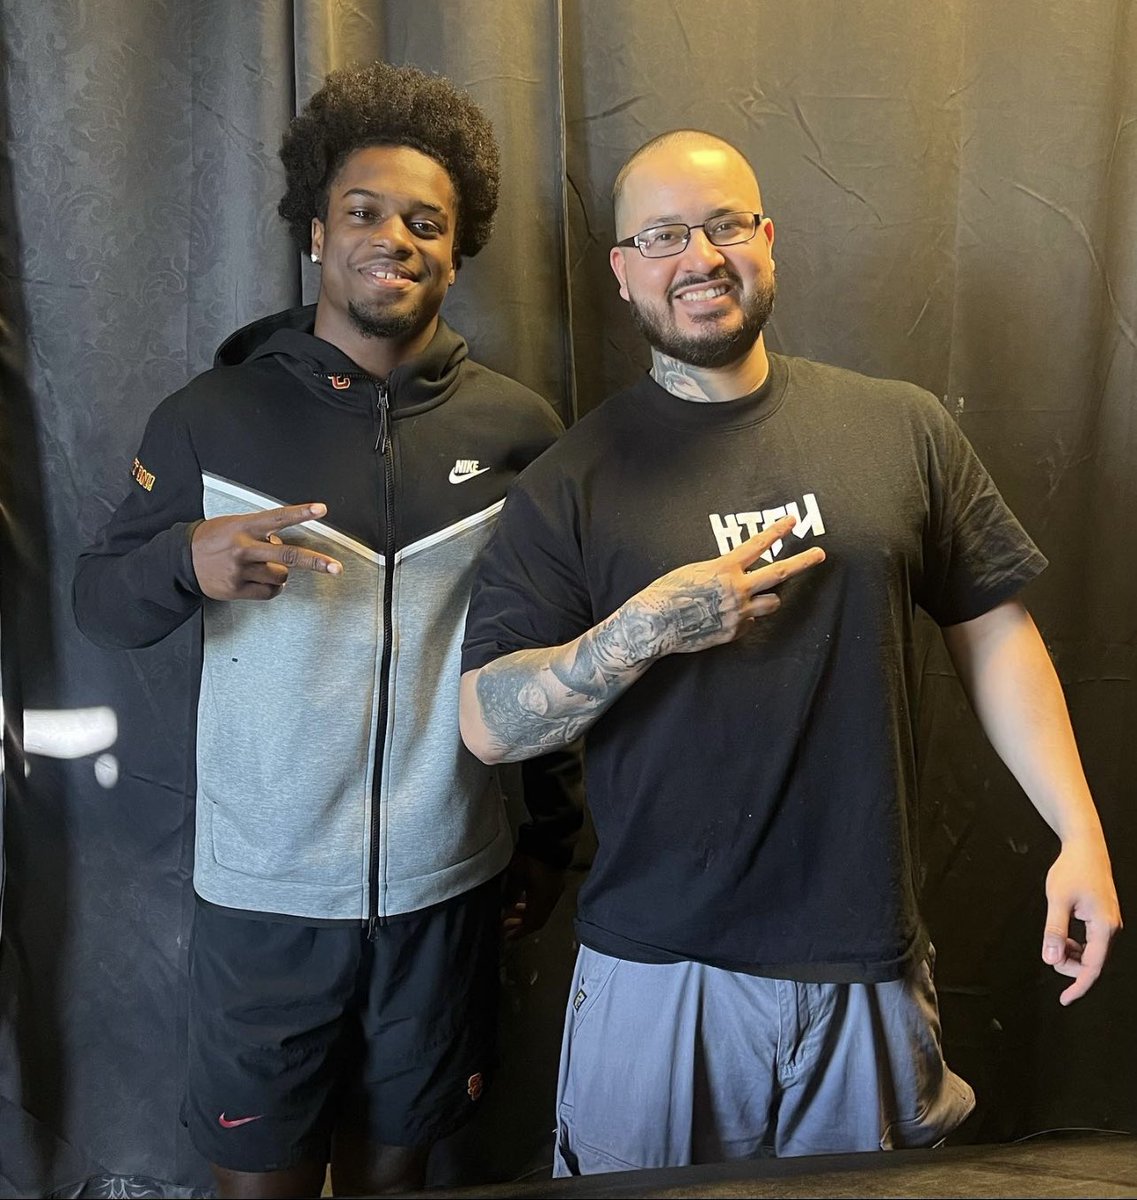 Post Season Rehab with @tahj_washington 🔥 💨 

Appreciate you trusting me and coming down for a session! 💯

Looking forward to seeing you kill it upcoming season at @uscfb ✌🏻🏈 

#football #usc #collegefootball #rehab #sportstherapy #sportsmassage #therapy #therapist #la